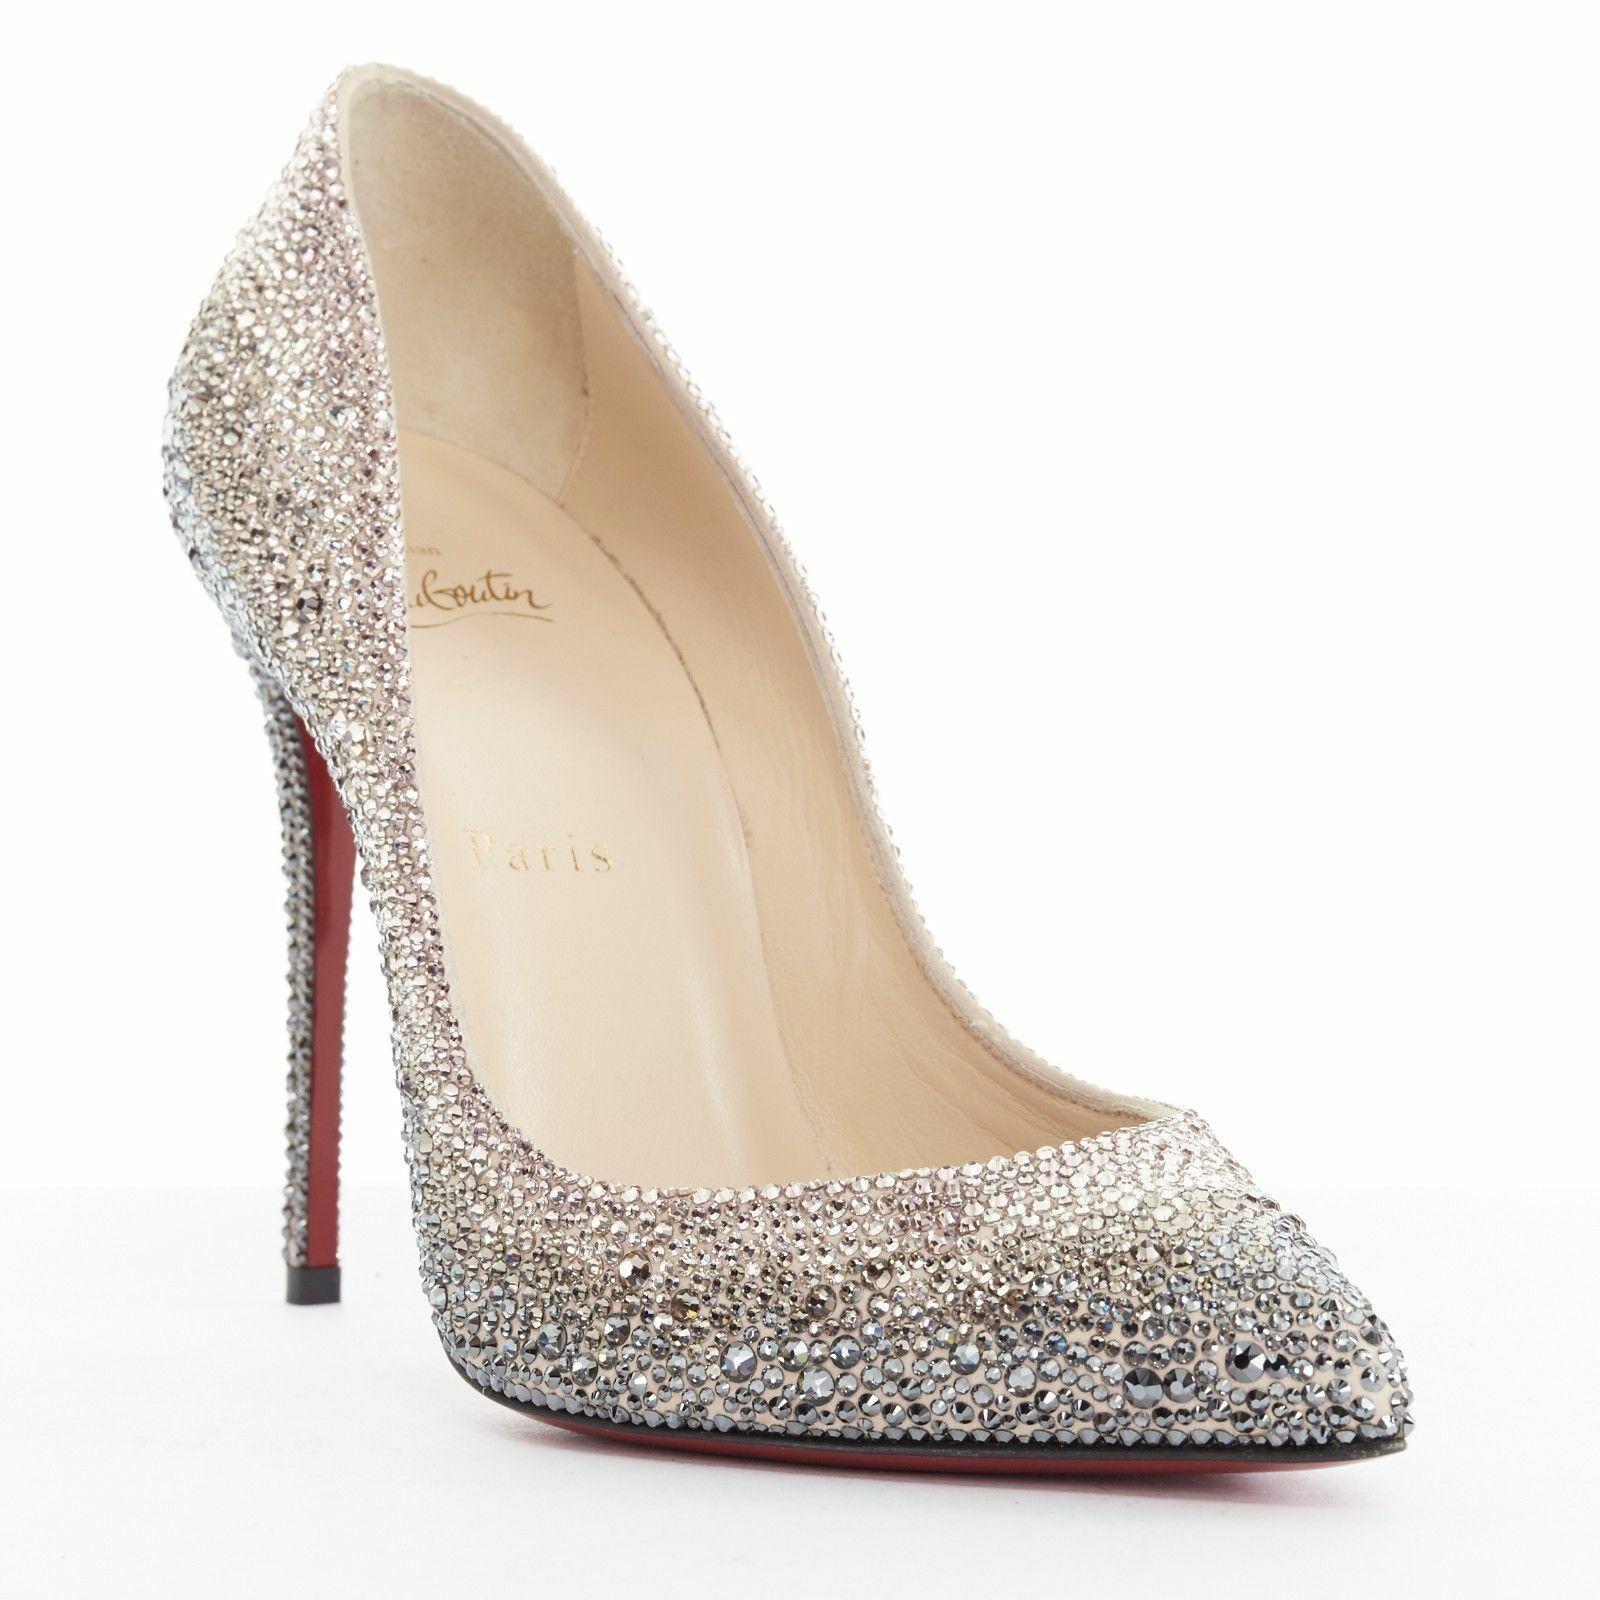 CHRISTIAN LOUBOUTIN
Follies Strass 100 Degrade. Nude suede upper. Fully embellished in strass crystals. Gradient from grey as base to nude to pink. Pointed toe. Tan leather lining. Lighly padded insole. Signature Christian Louboutin red lacquered